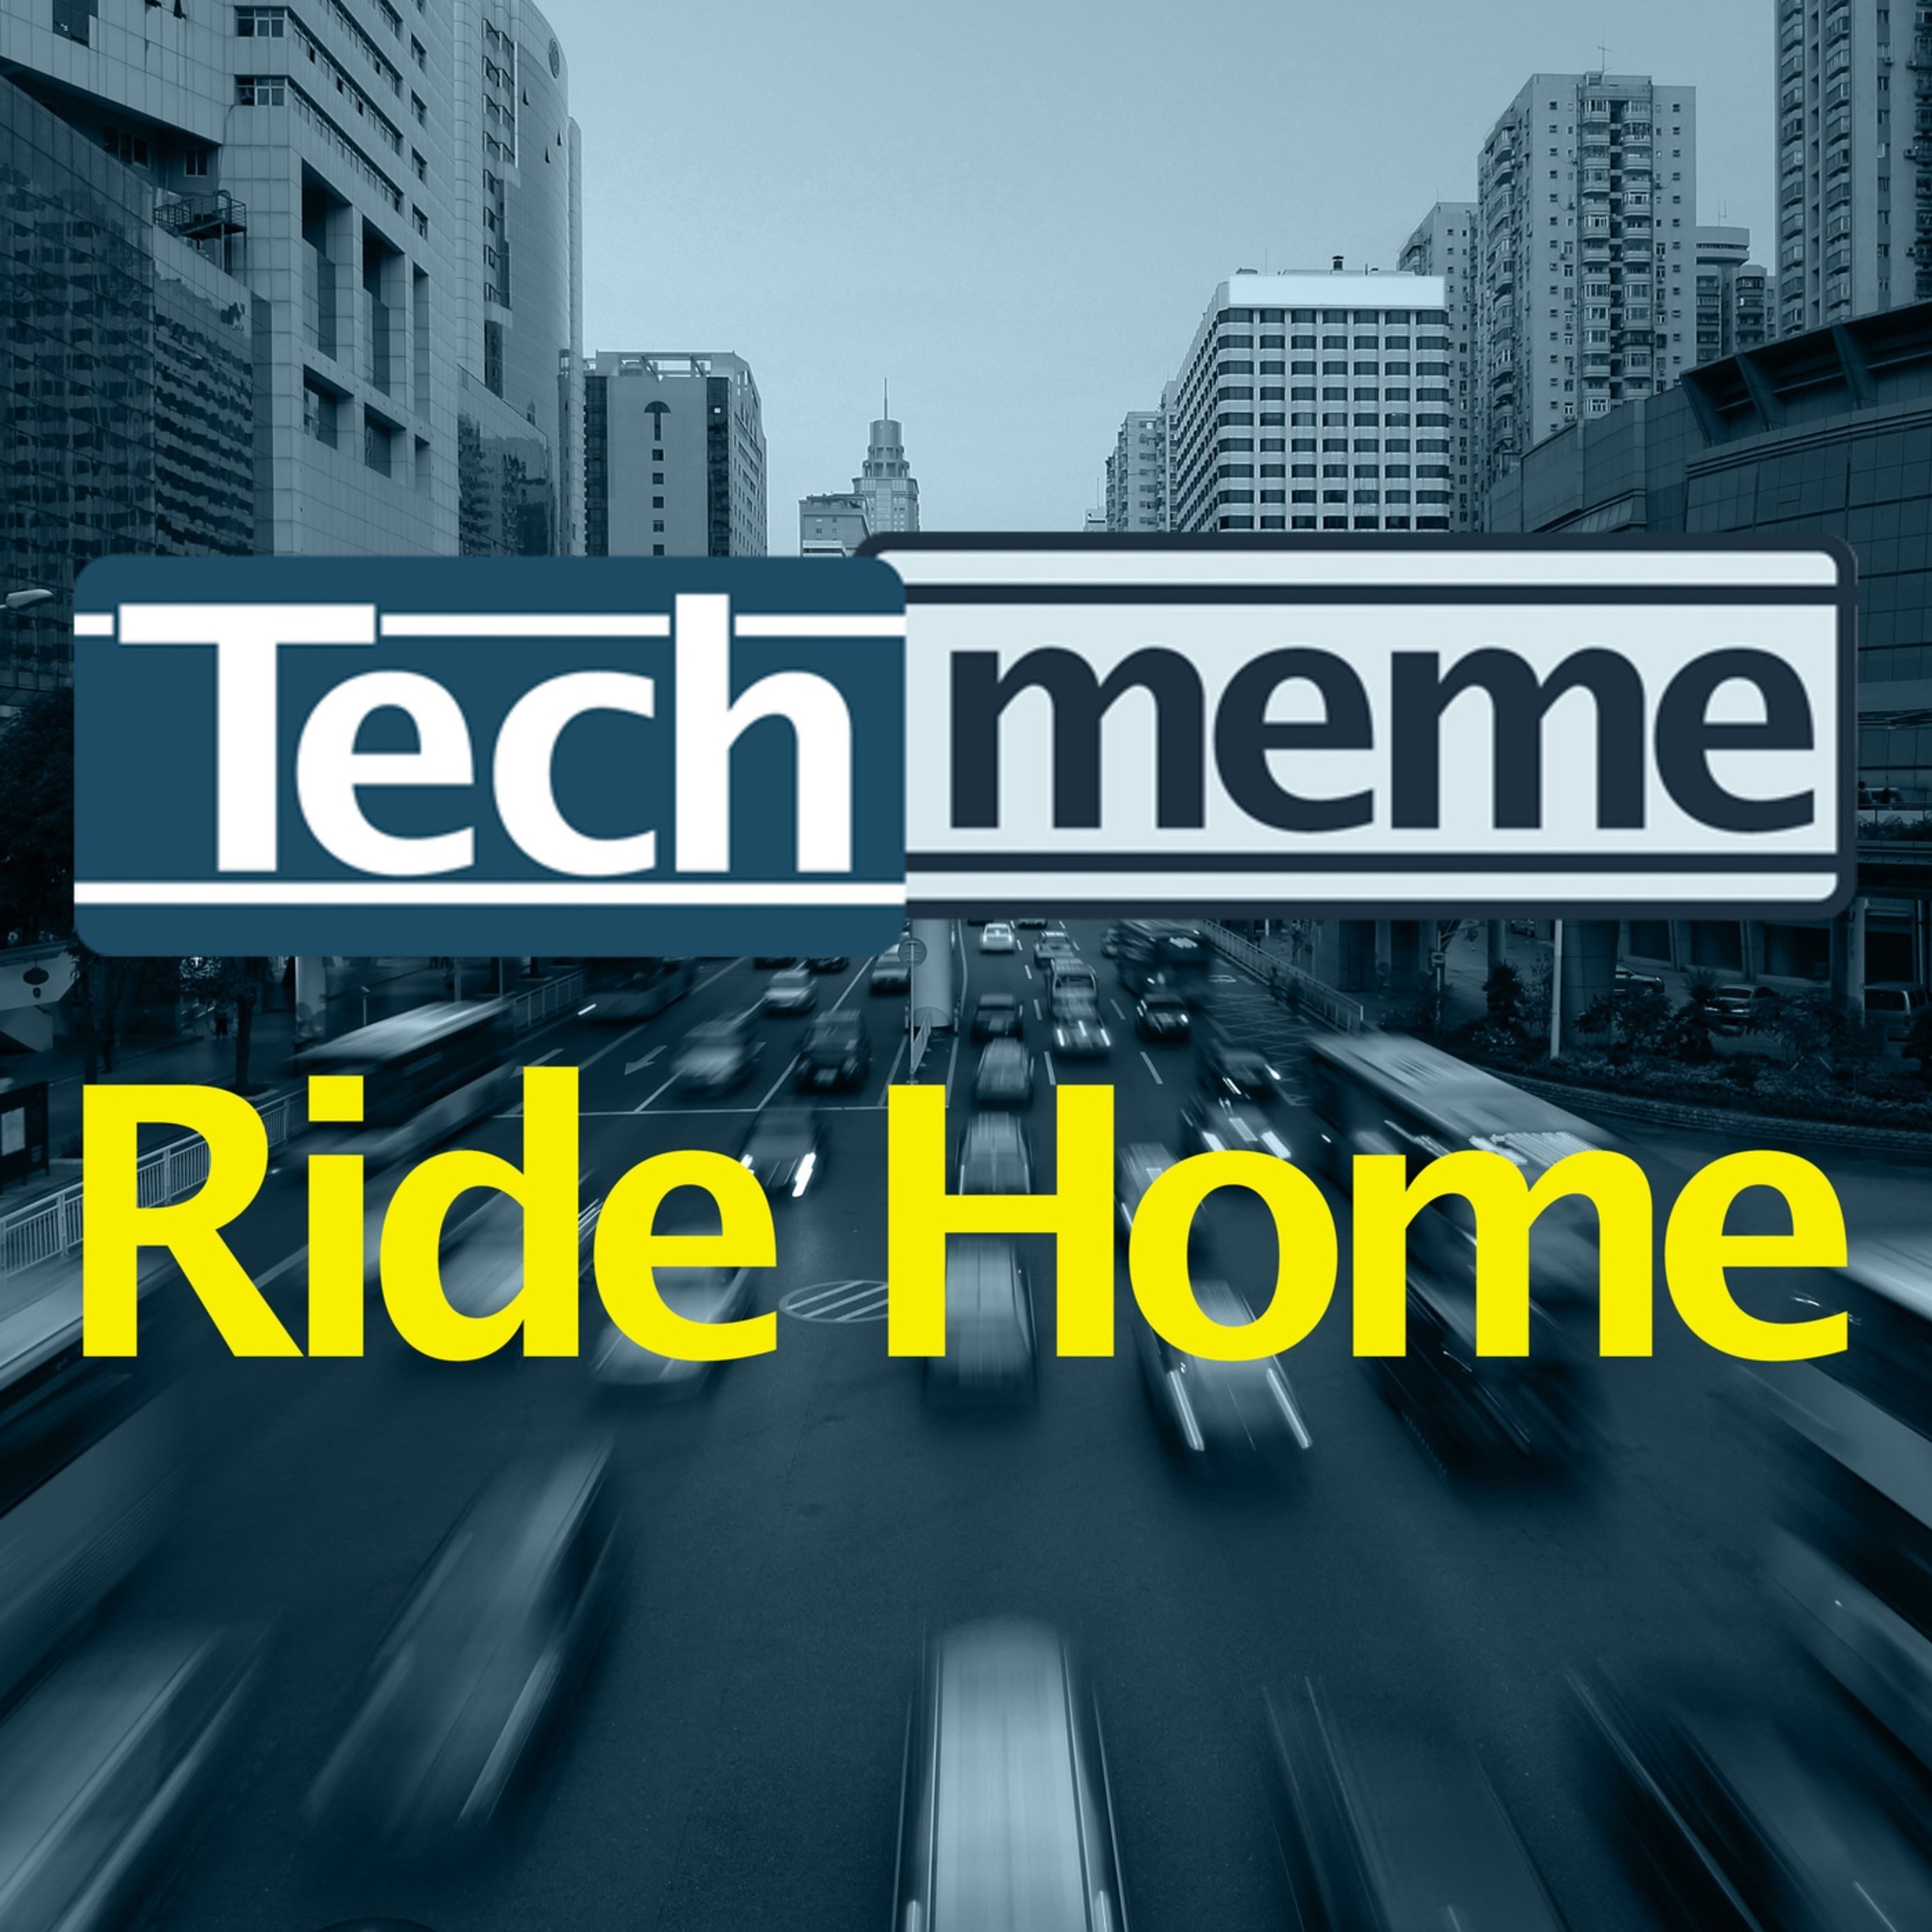 Techmeme Ride Home - a16z's Future Plans And Audio Spaces With @smc90 and @kyurieff